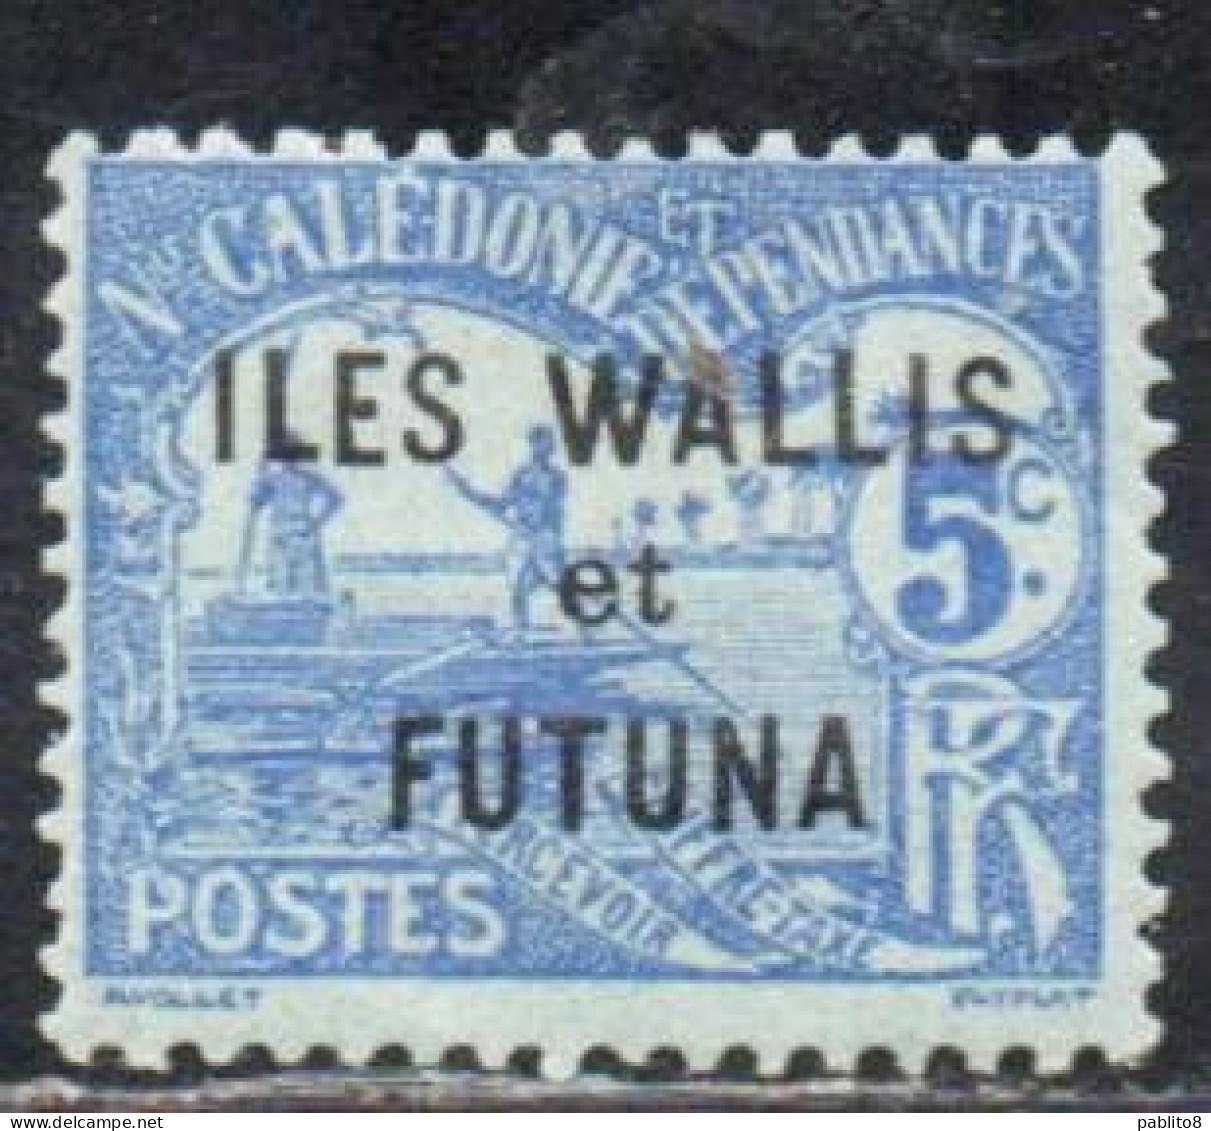 WALLIS AND FUTUNA ISLANDS 1920 POSTAGE DUE STAMPS TAXE SEGNATASSE MEN POLING BOAT NEW CALEDONIA OVERPRINTED 5c MH - Timbres-taxe